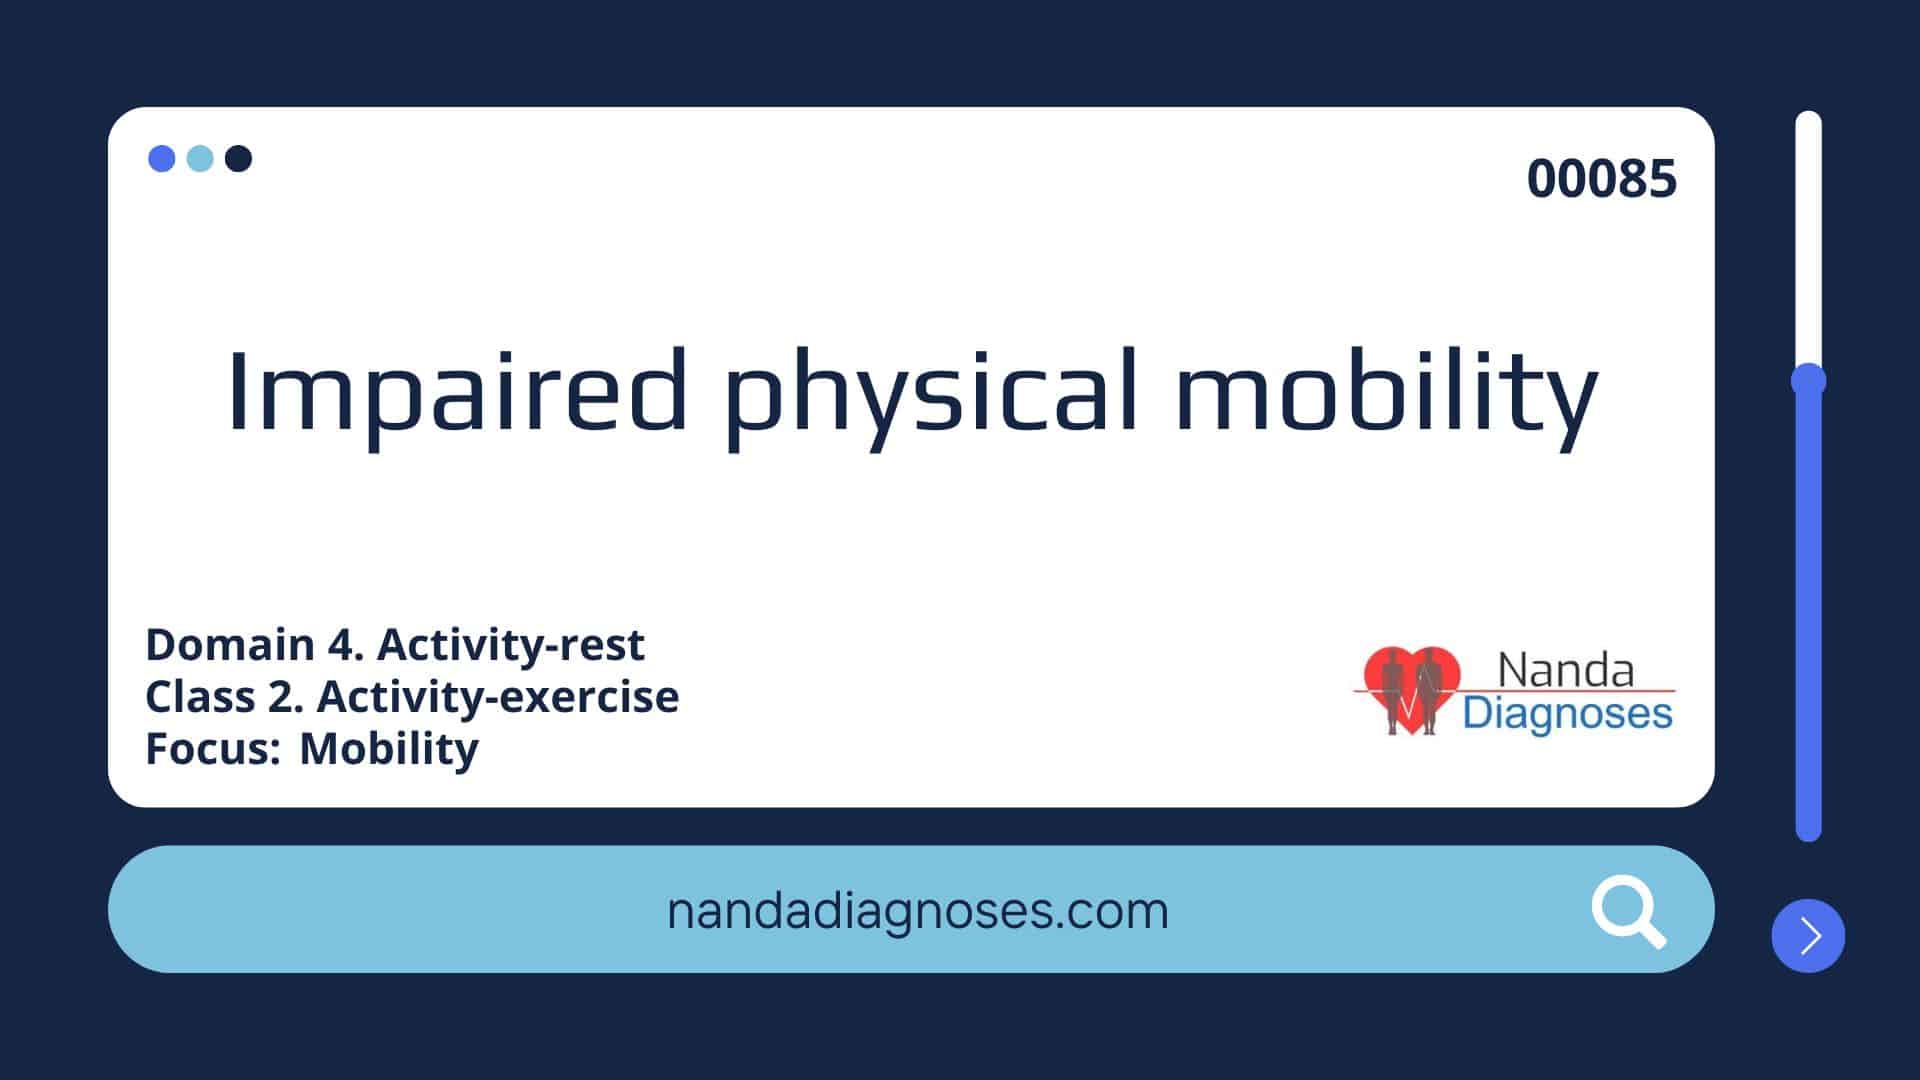 Impaired physical mobility